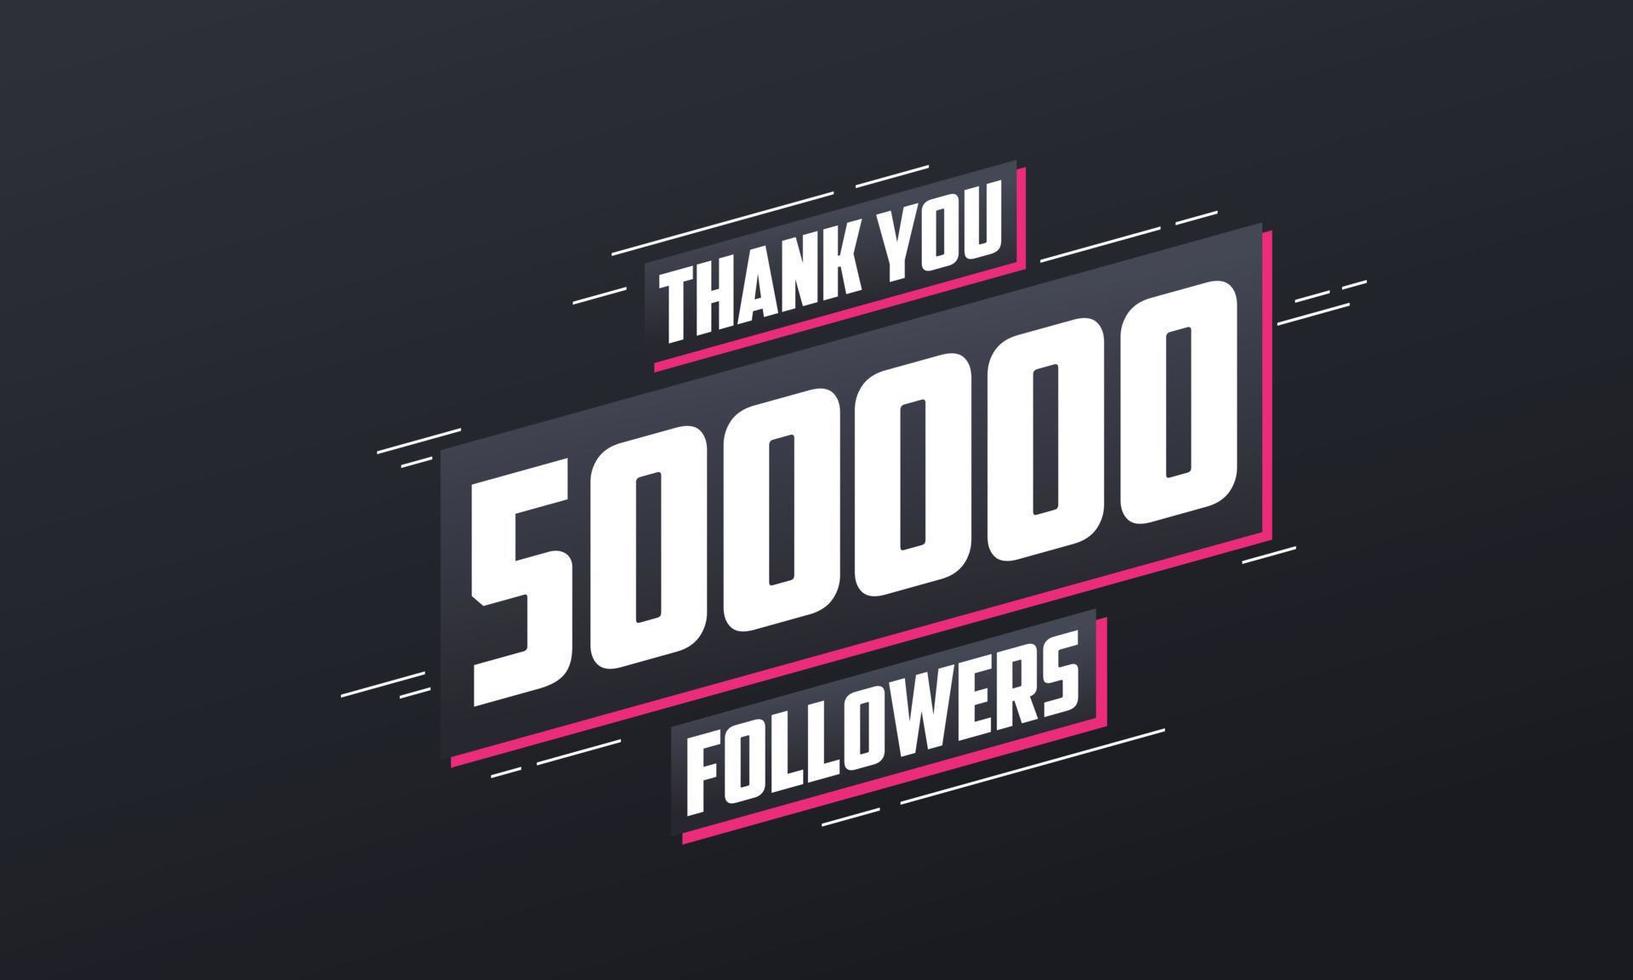 Thank you 500,000 followers, Greeting card template for social networks. vector